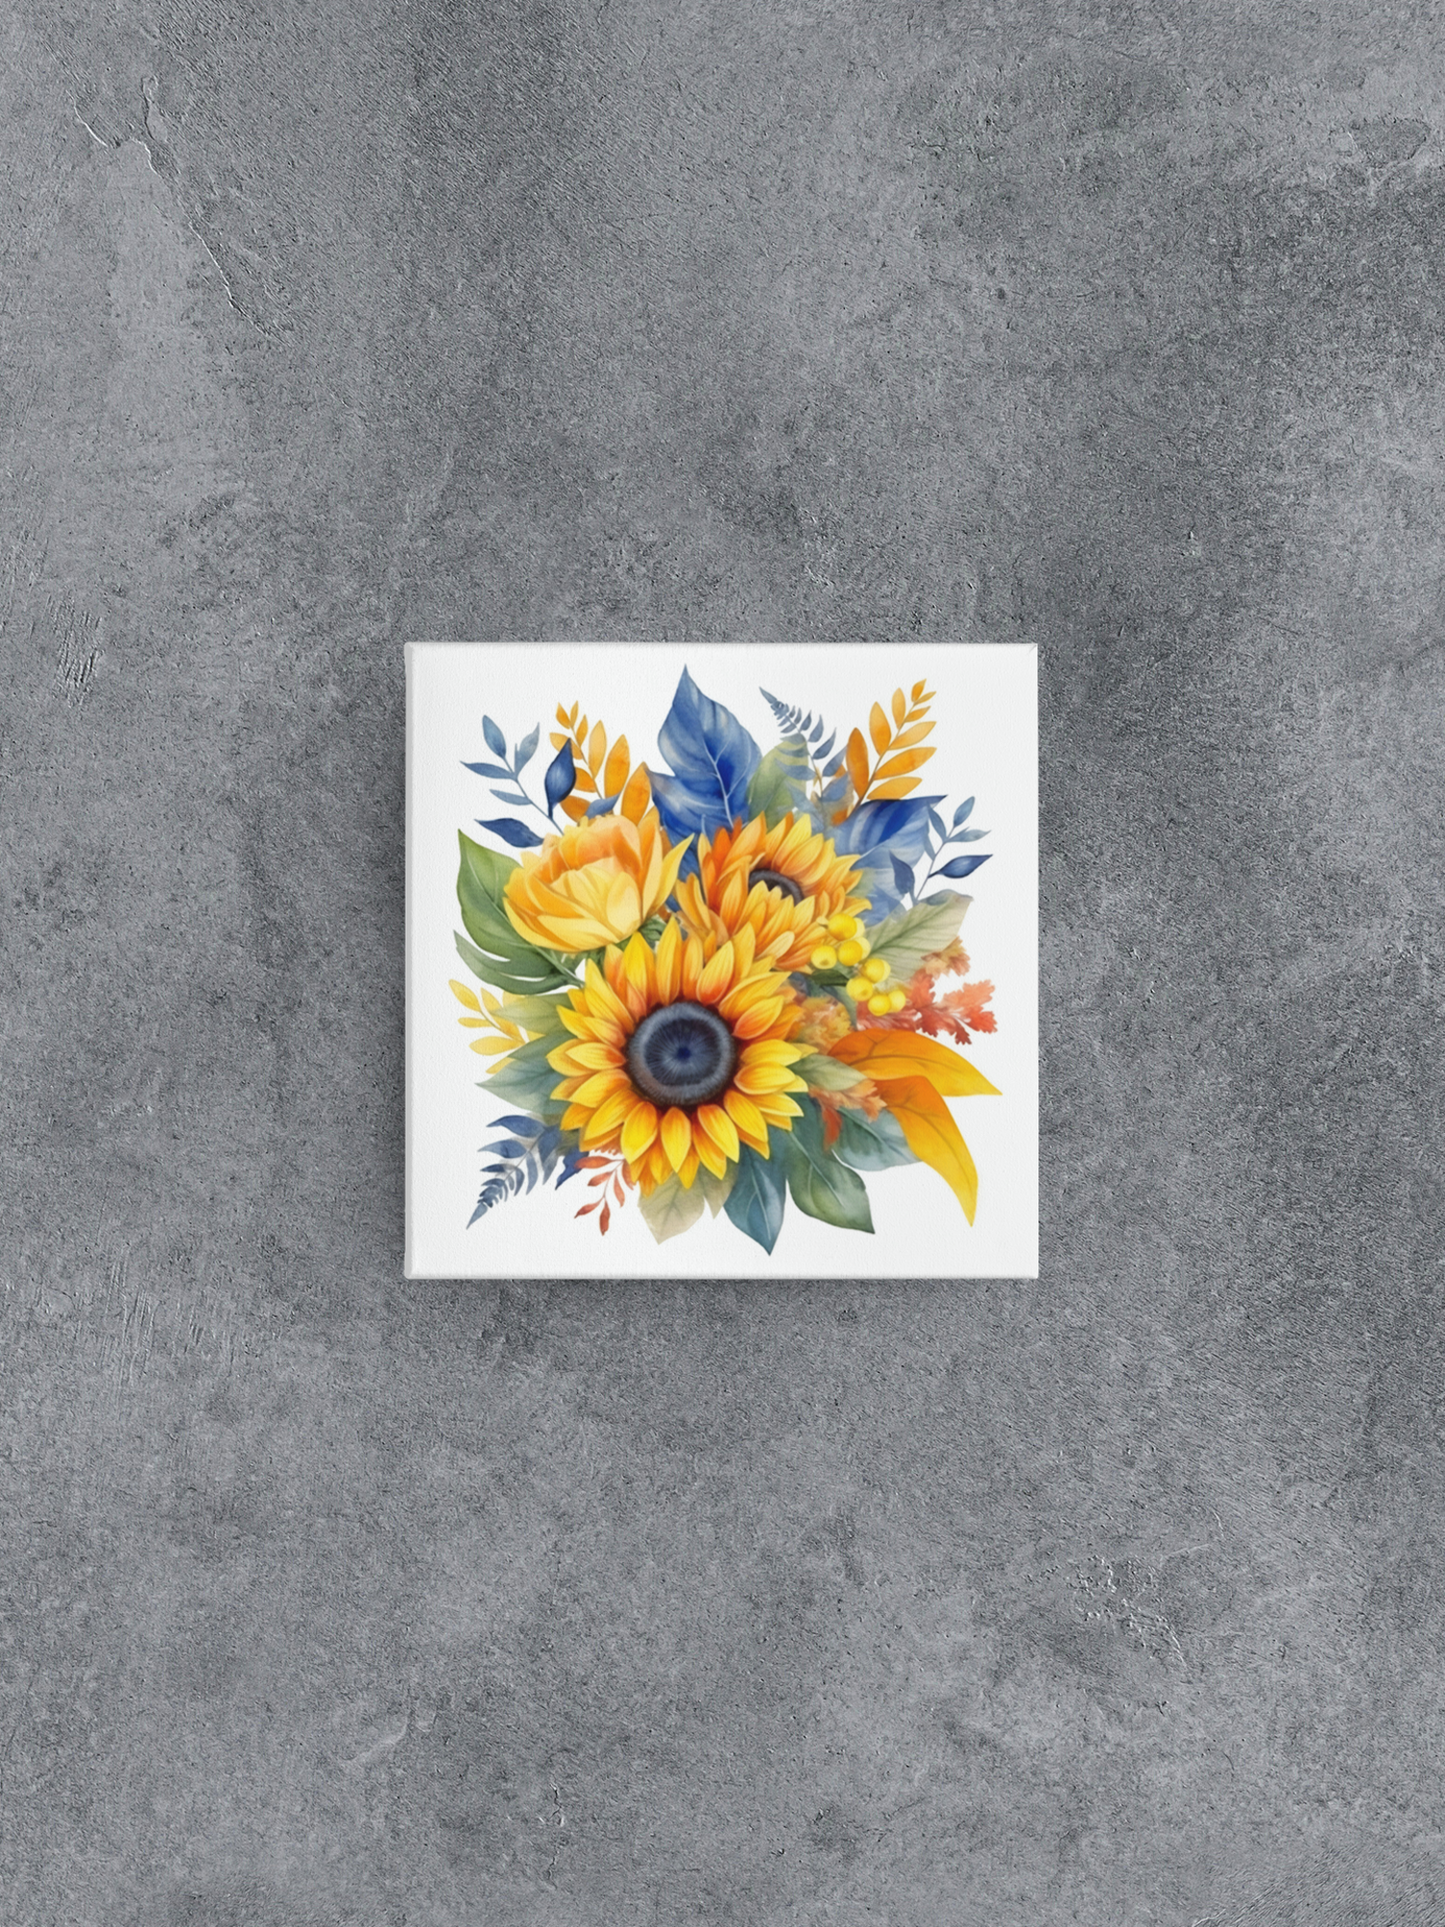 Sunflower Canvas Wall Art, Sunflowers Painting, Flower Canvas Print, Nature Stretch Canvas Art, Yellow Wall Decor, Mother's Day Gift